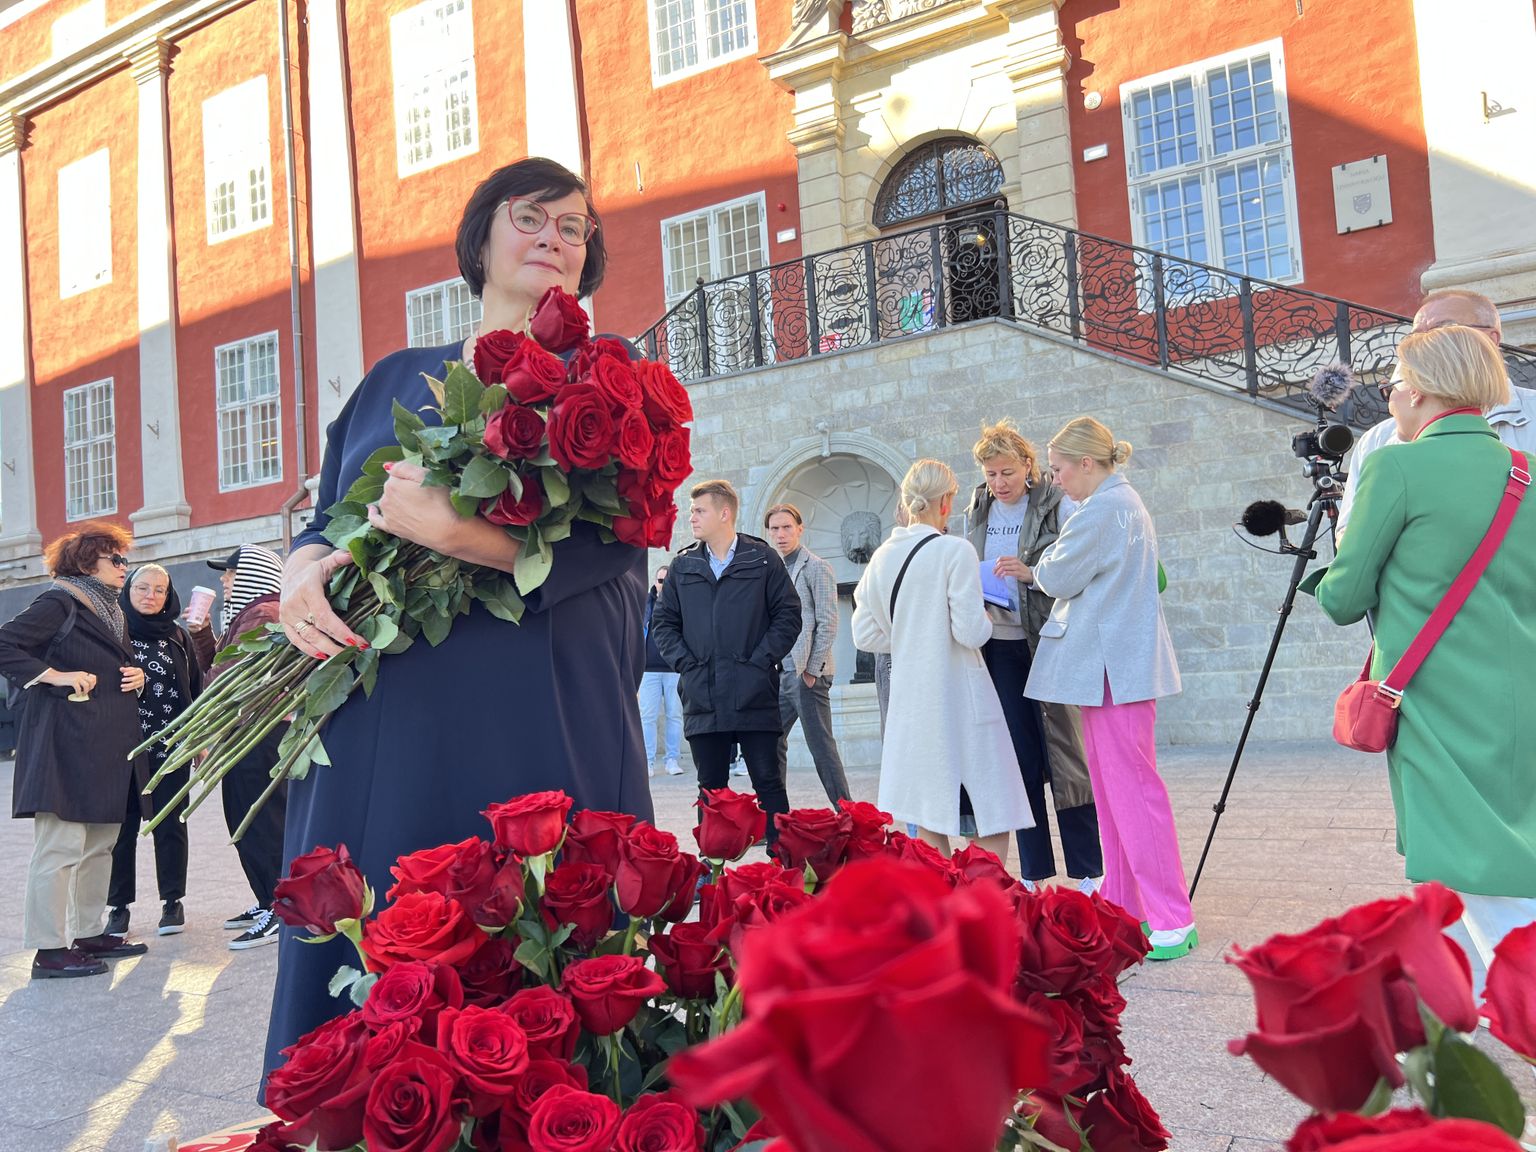 The council of the northeastern Estonian border city Narva voted at its extraordinary sitting on Saturday morning in favor of a censure motion against Mayor Katri Raik.